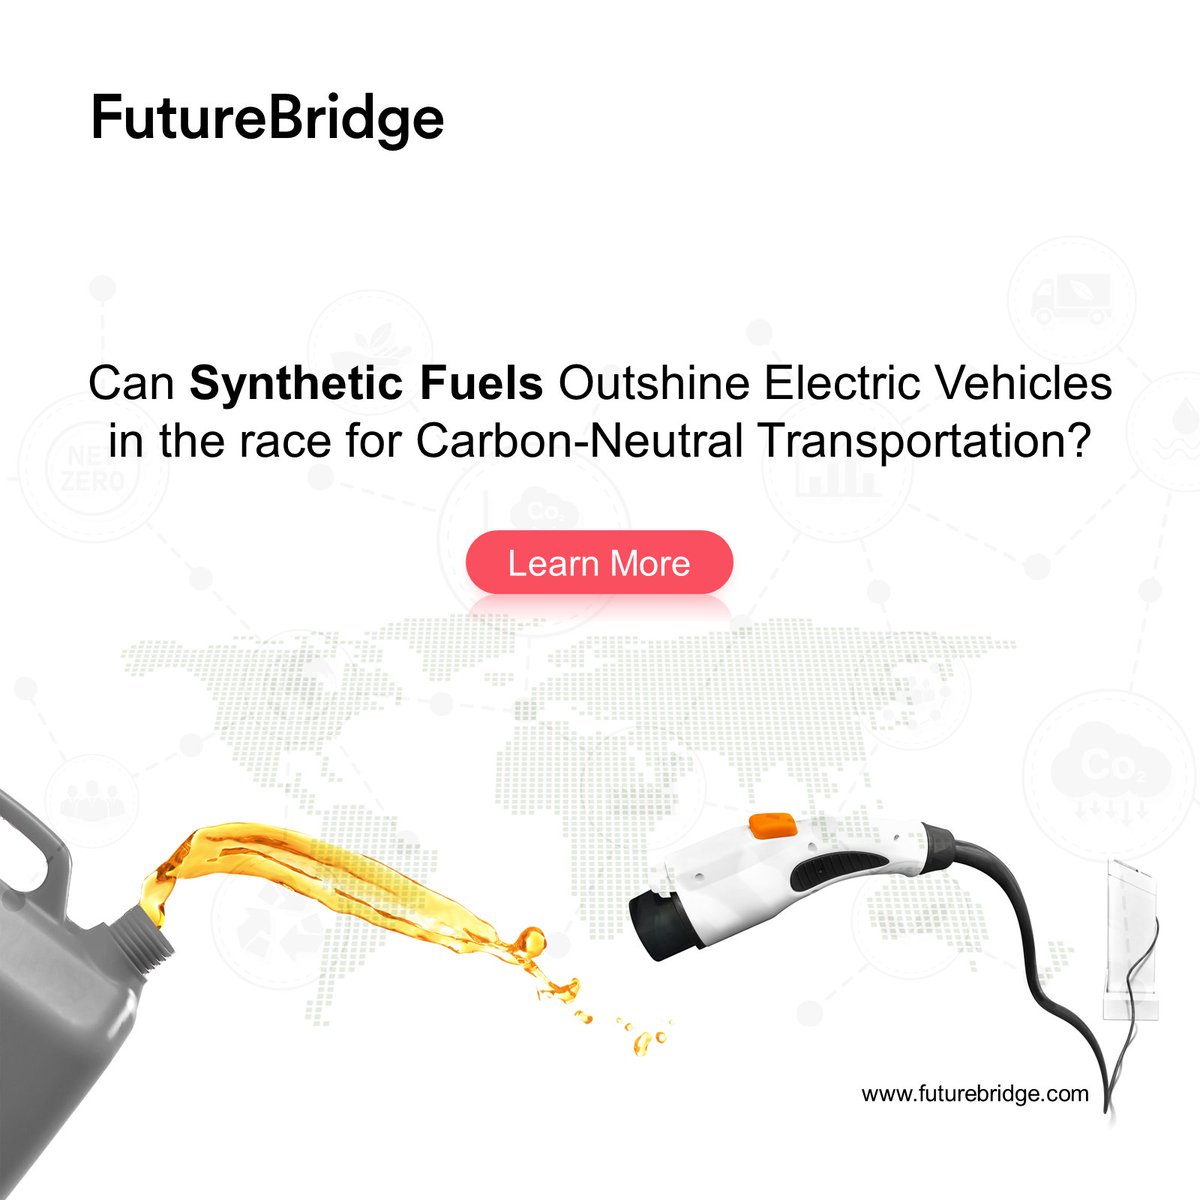 The future of sustainable transportation is evolving rapidly, with electric vehicles gaining momentum as renewable energy solution.
Read more: bit.ly/3qCsh6j

#SyntheticFuels #AlternativeFuels #CleanEnergy
#ClimateChange #CarbonNeutral #FuelTechnology #TechForesight